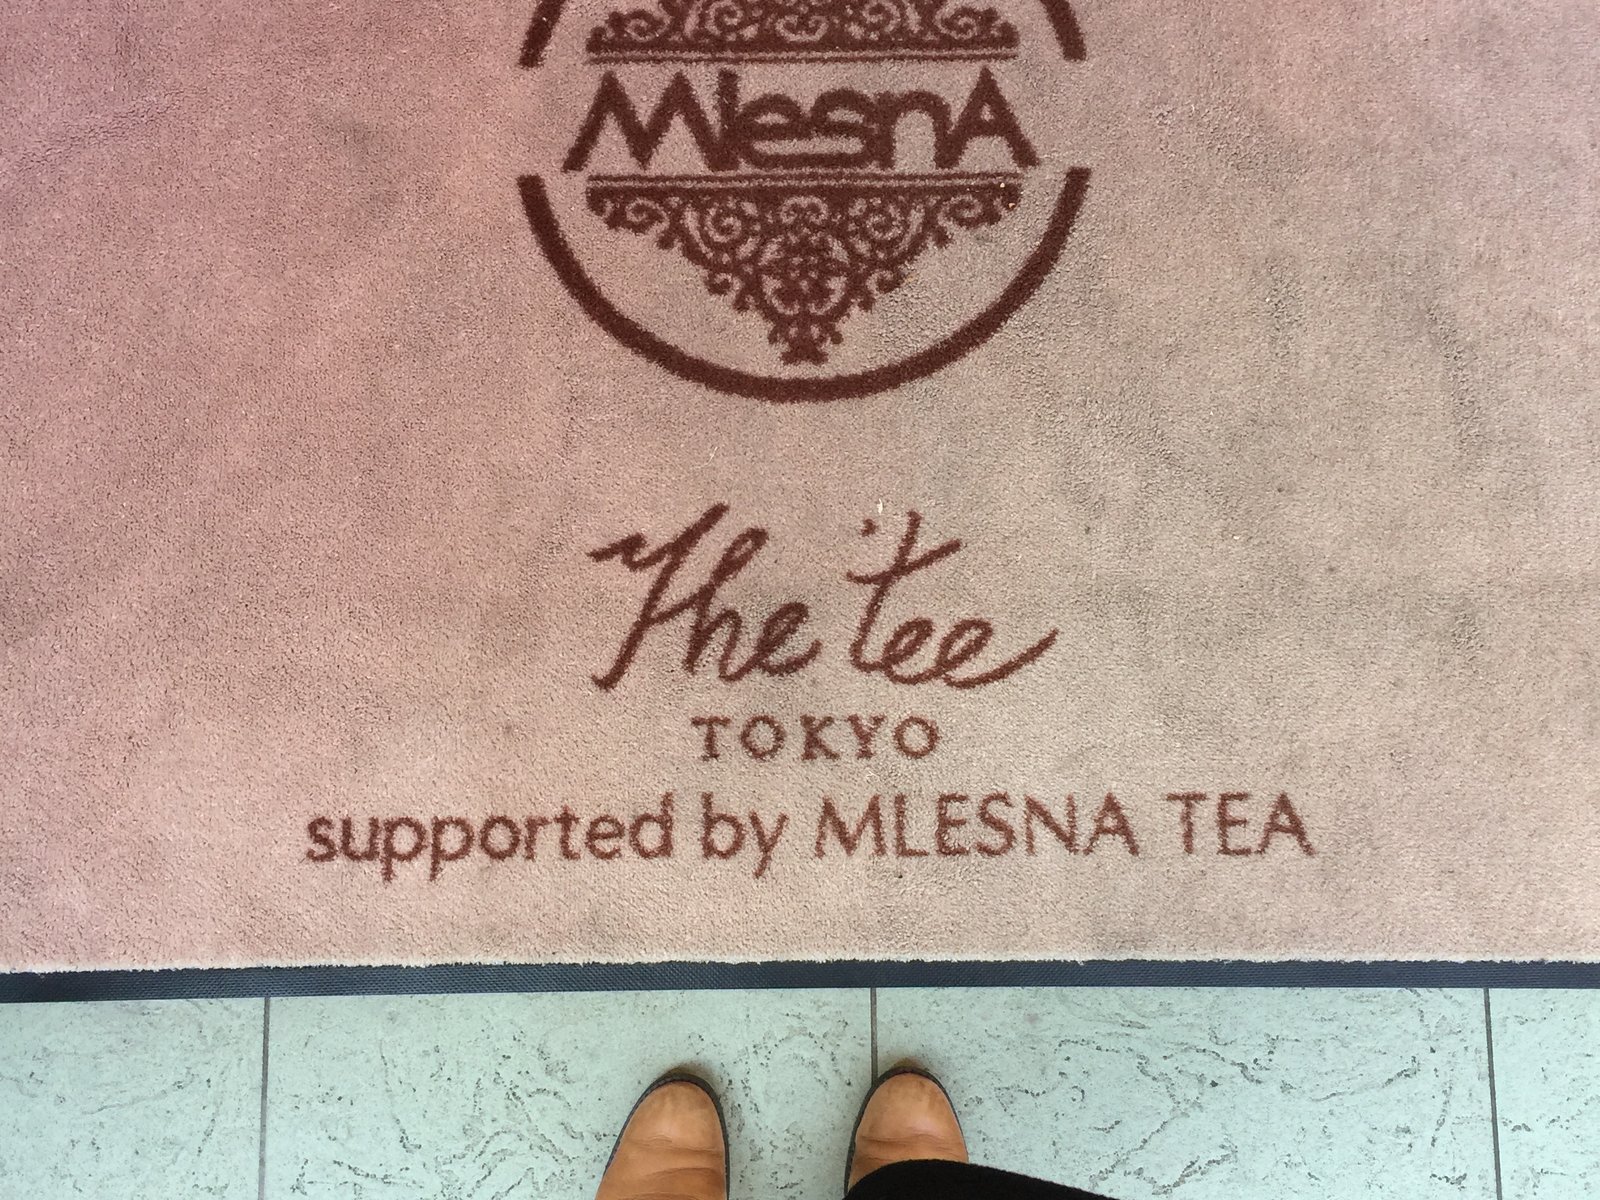 The tee Tokyo　supported by MLESNA TEA